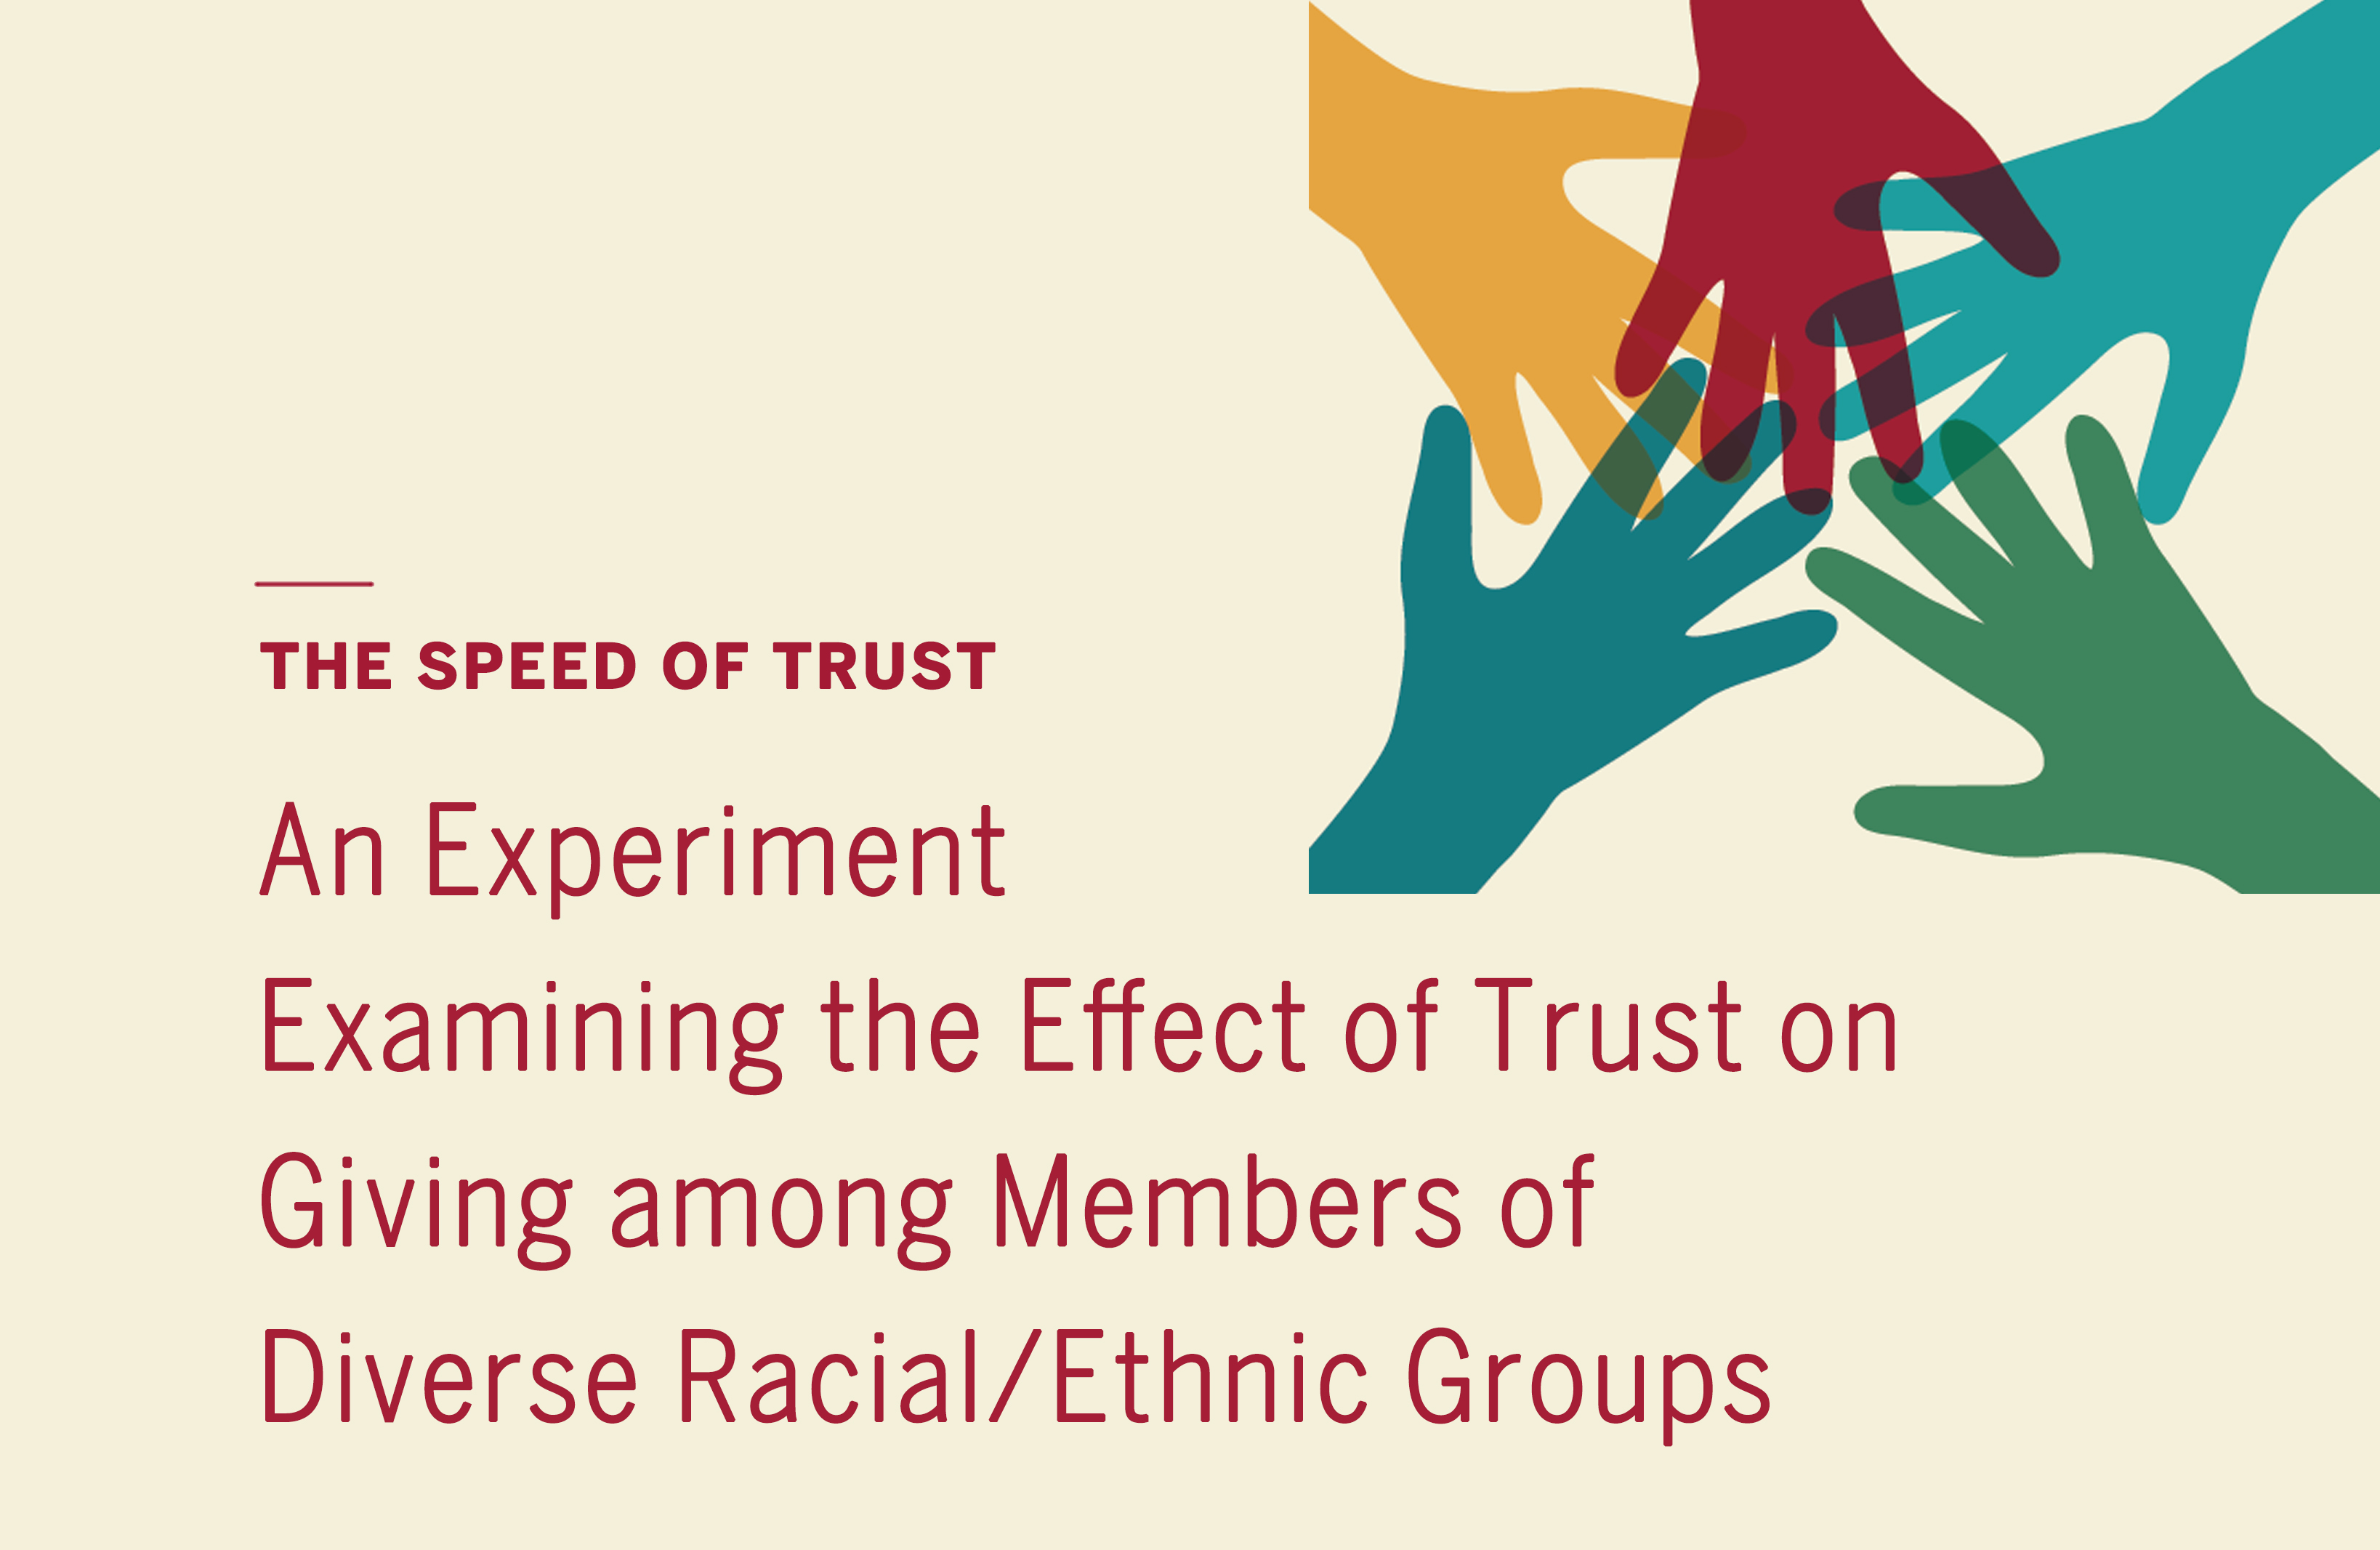 An experiment examine the effect of trust on giving amount members of divers racial/ethnic groups the speed of trust feature